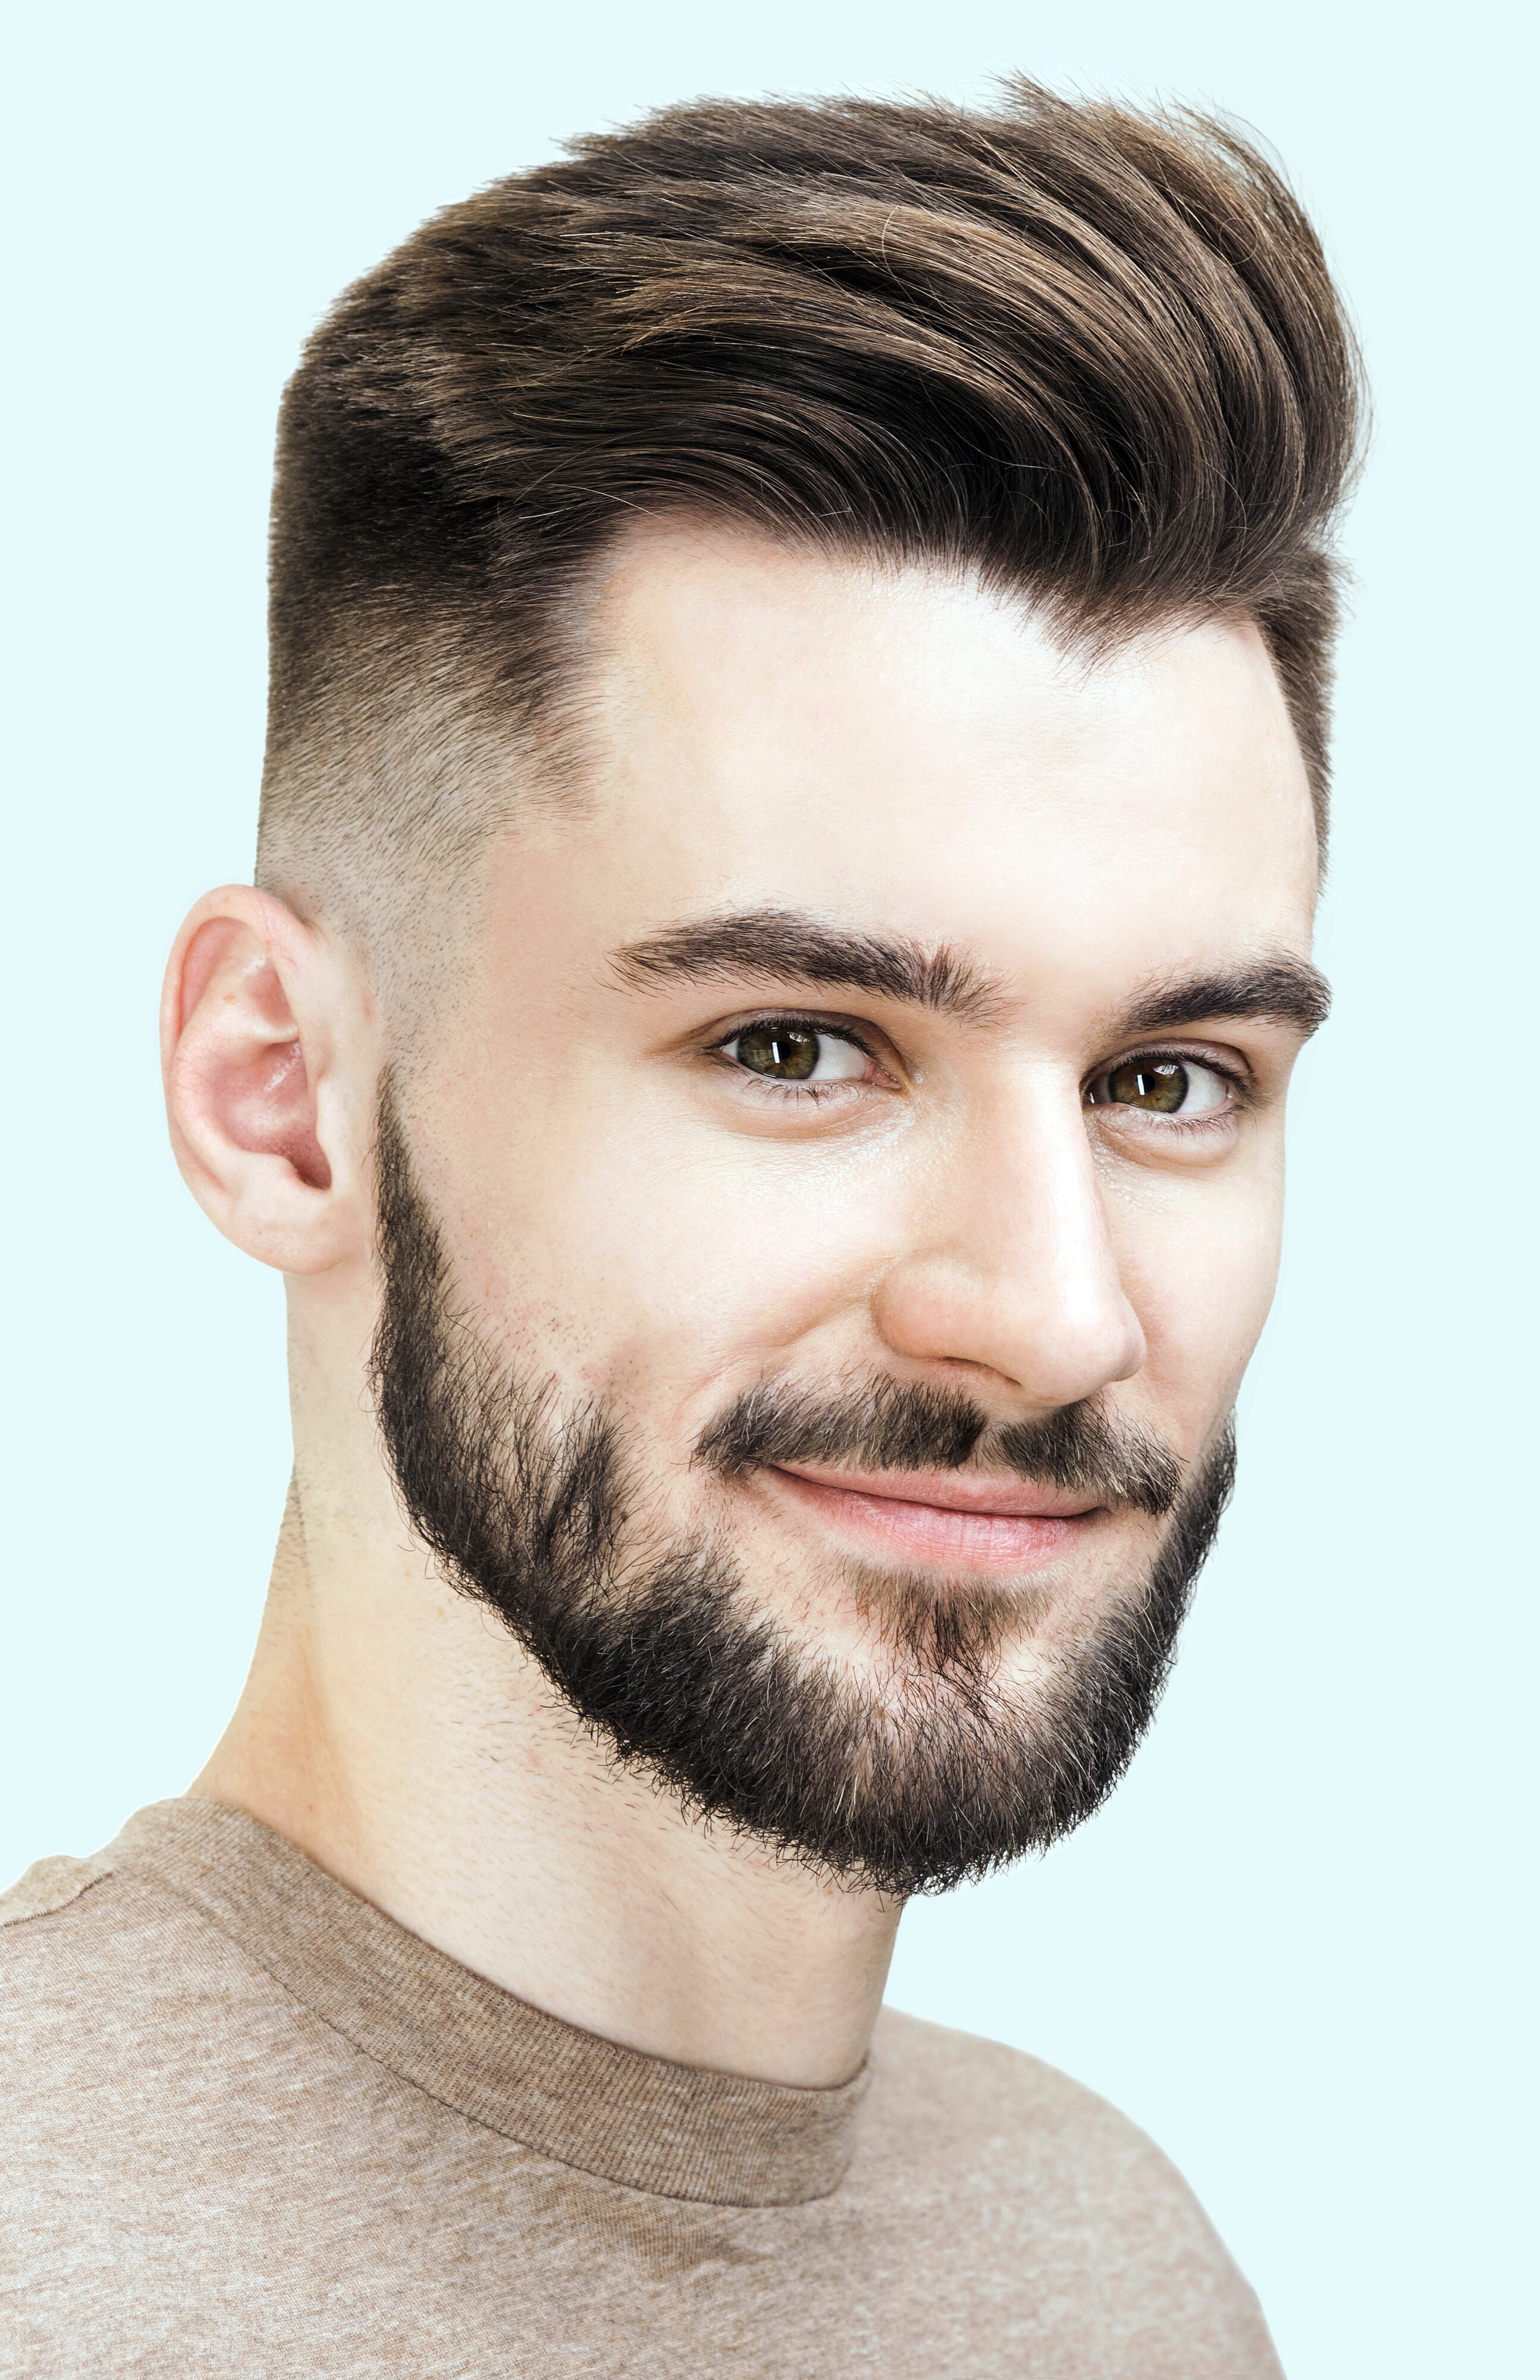 20 Best Widow's Peak Hairstyles For Men | Haircut Inspiration